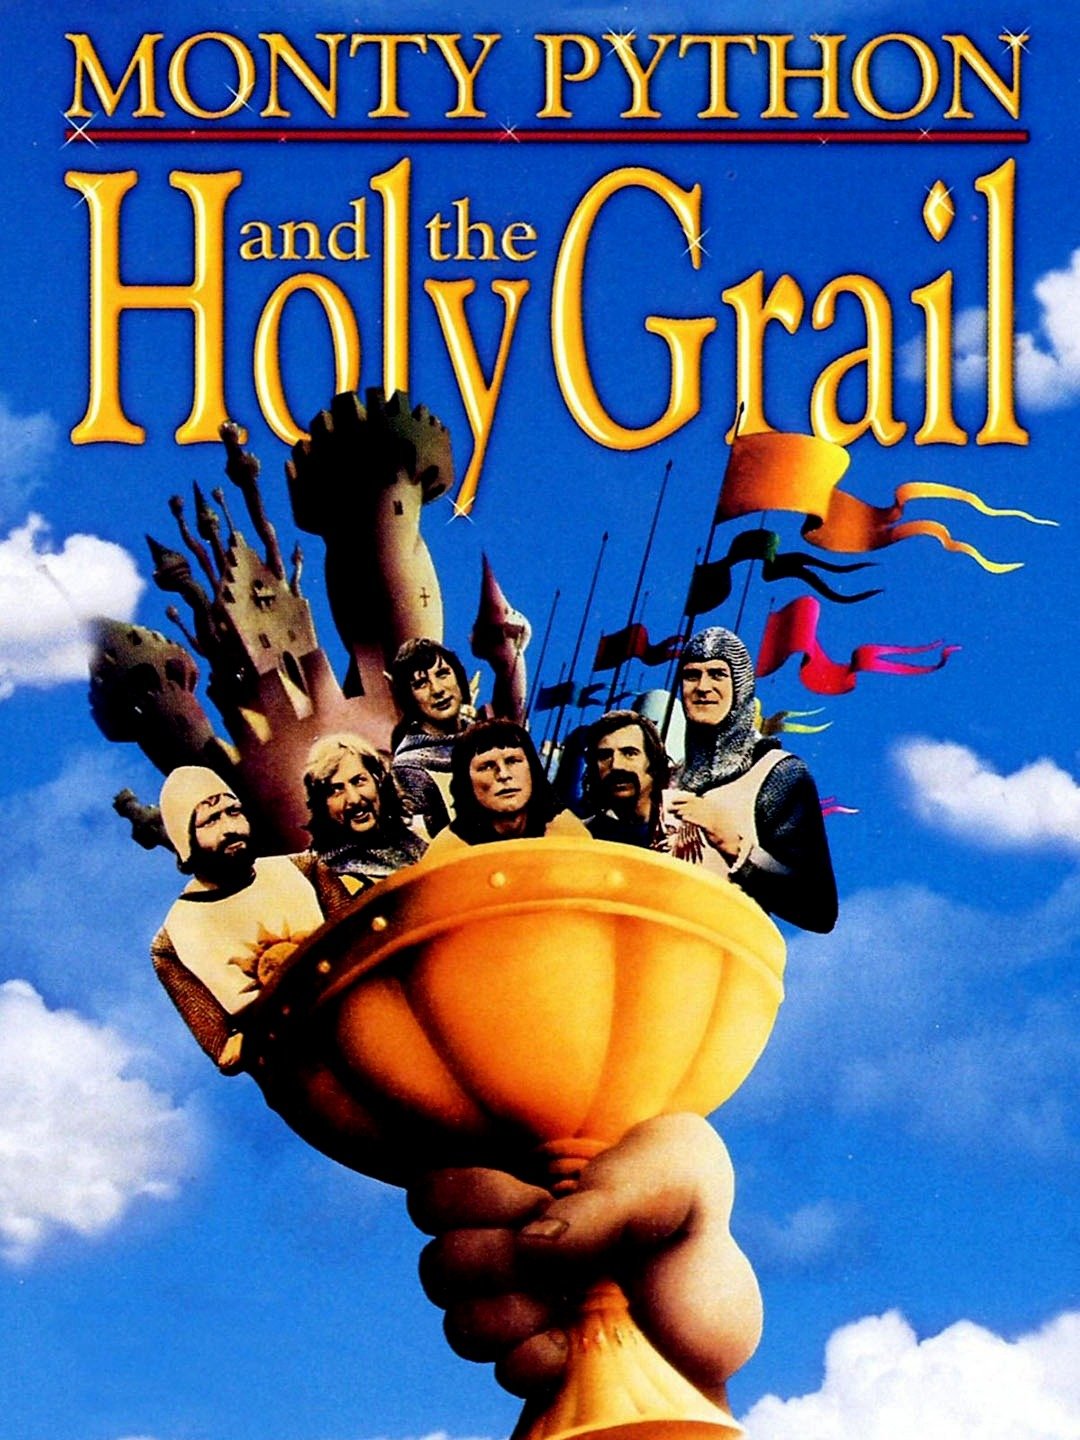 Monty Python and the Holy Grail Trailer 1 Trailers & Videos Rotten